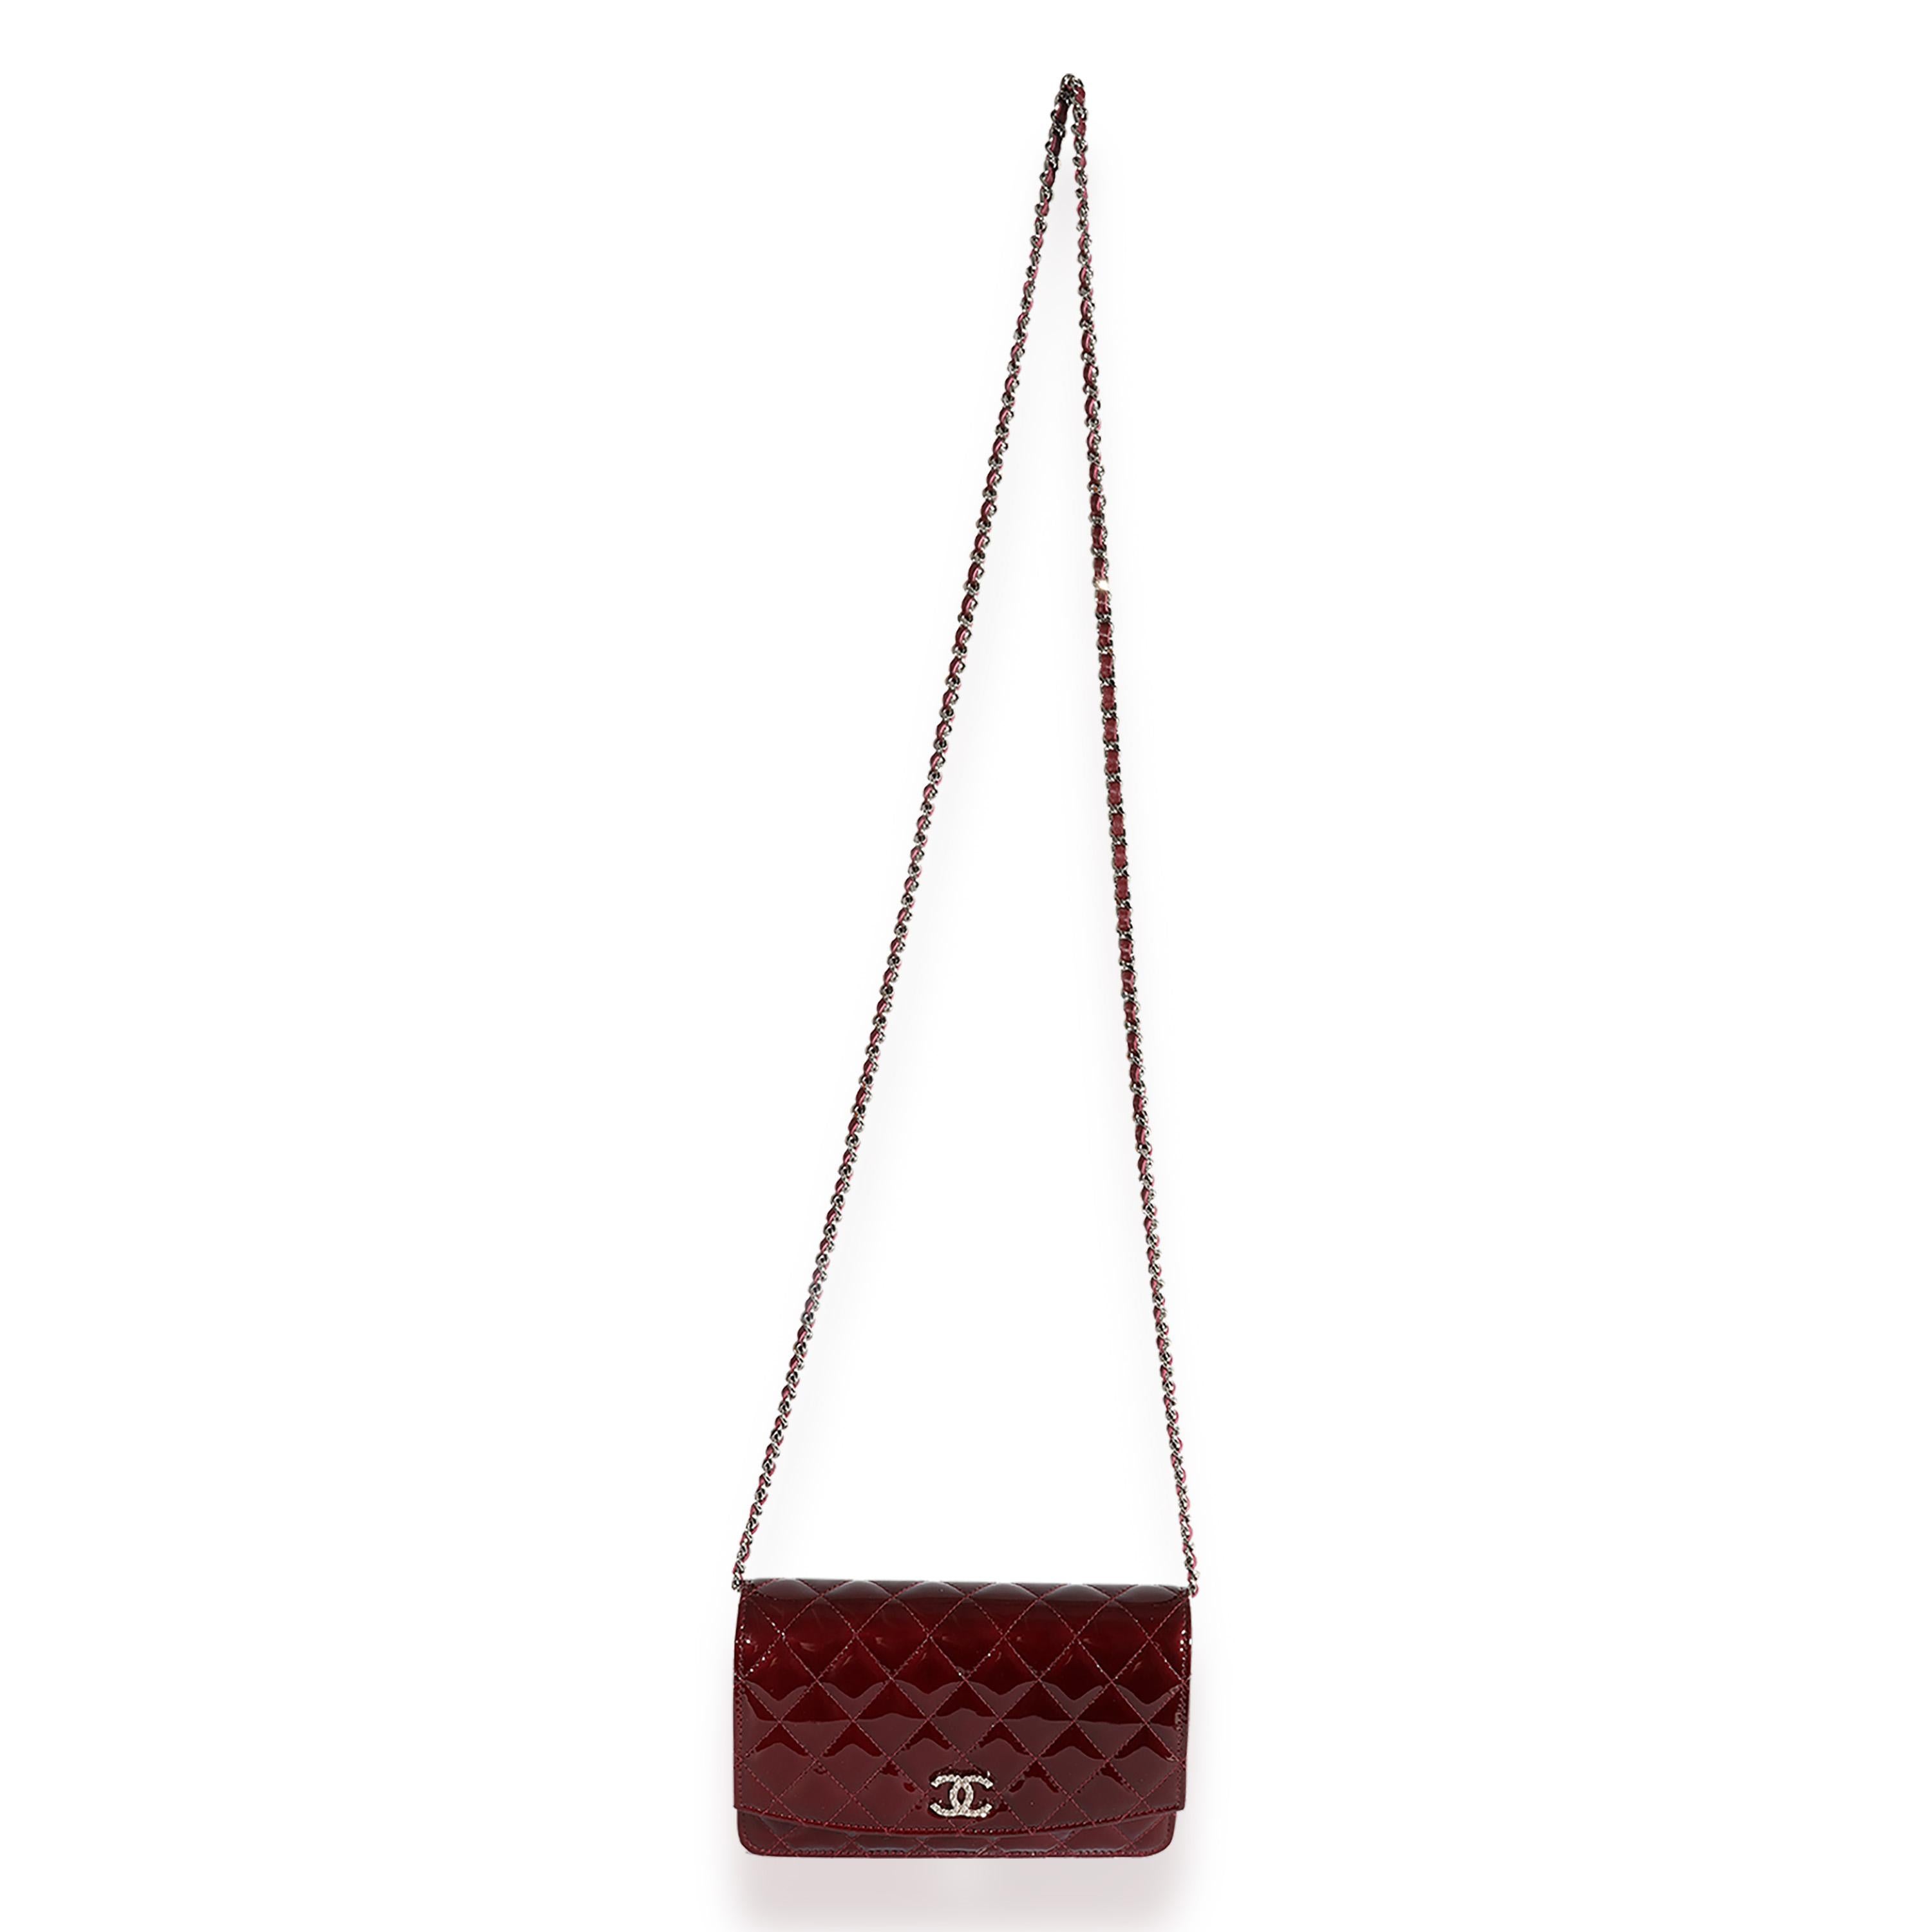 Listing Title: Chanel Burgundy Quilted Patent Leather Brilliant Wallet On Chain
SKU: 124002
Condition: Pre-owned 
Handbag Condition: Very Good
Condition Comments: Very Good Condition. Light smudging and marks to patent leather. Scuffing to interior